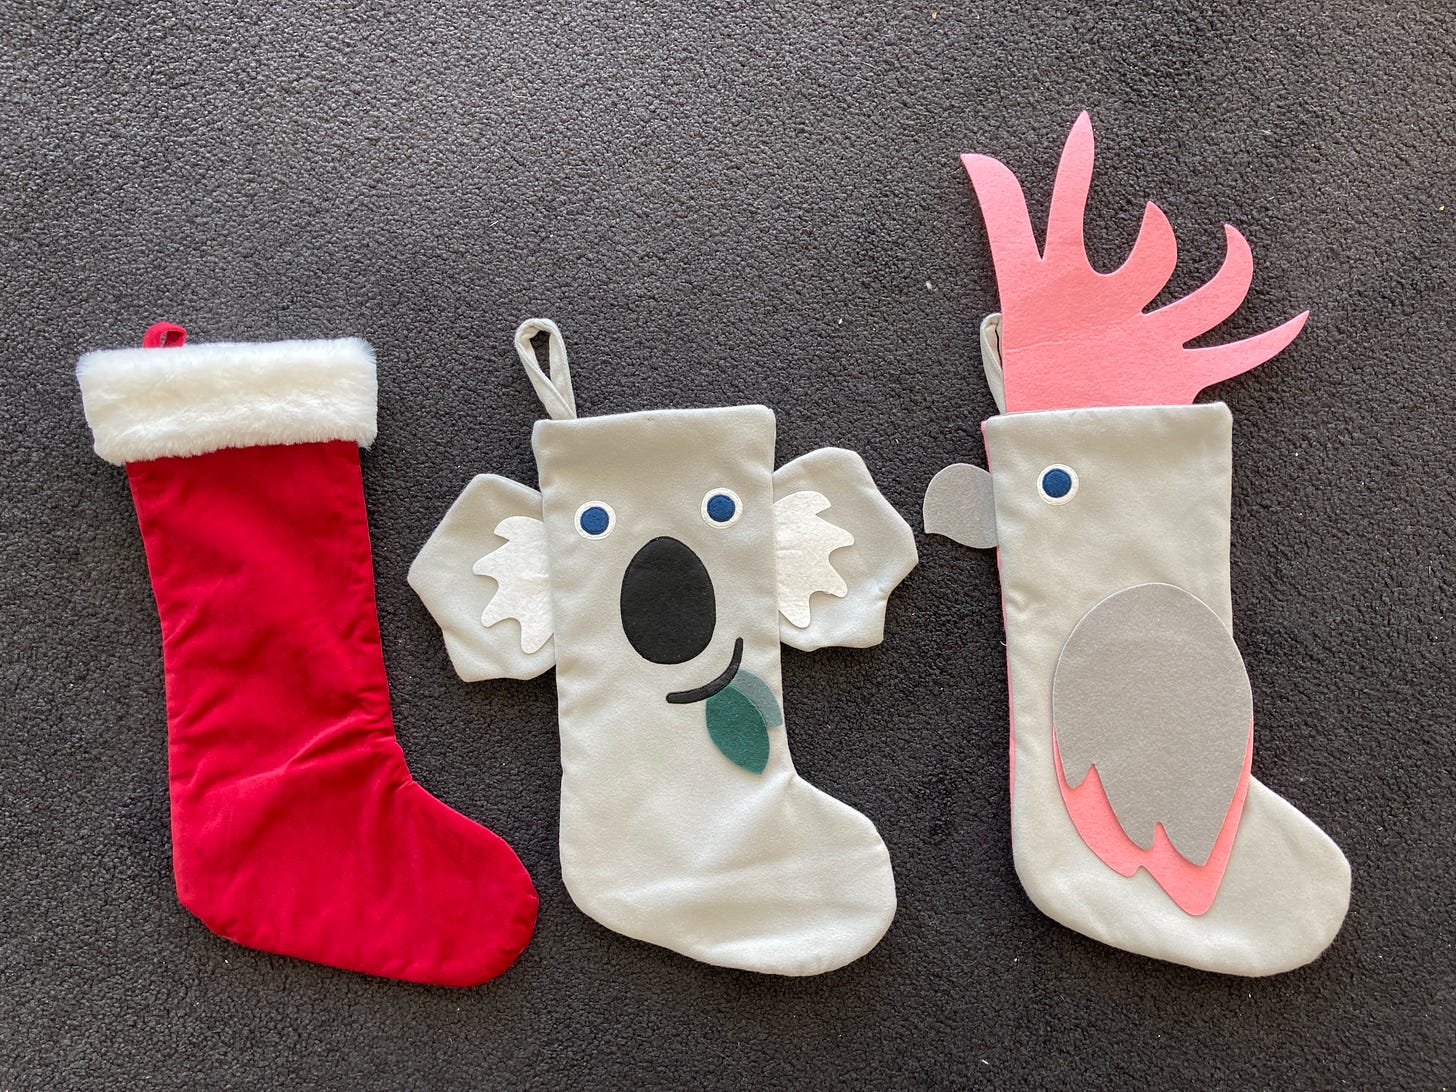 A picture of our Christmas stockings. One traditional red velvet and fur, one with a koala face and ears, and one pink cockatoo with a giant pink comb.